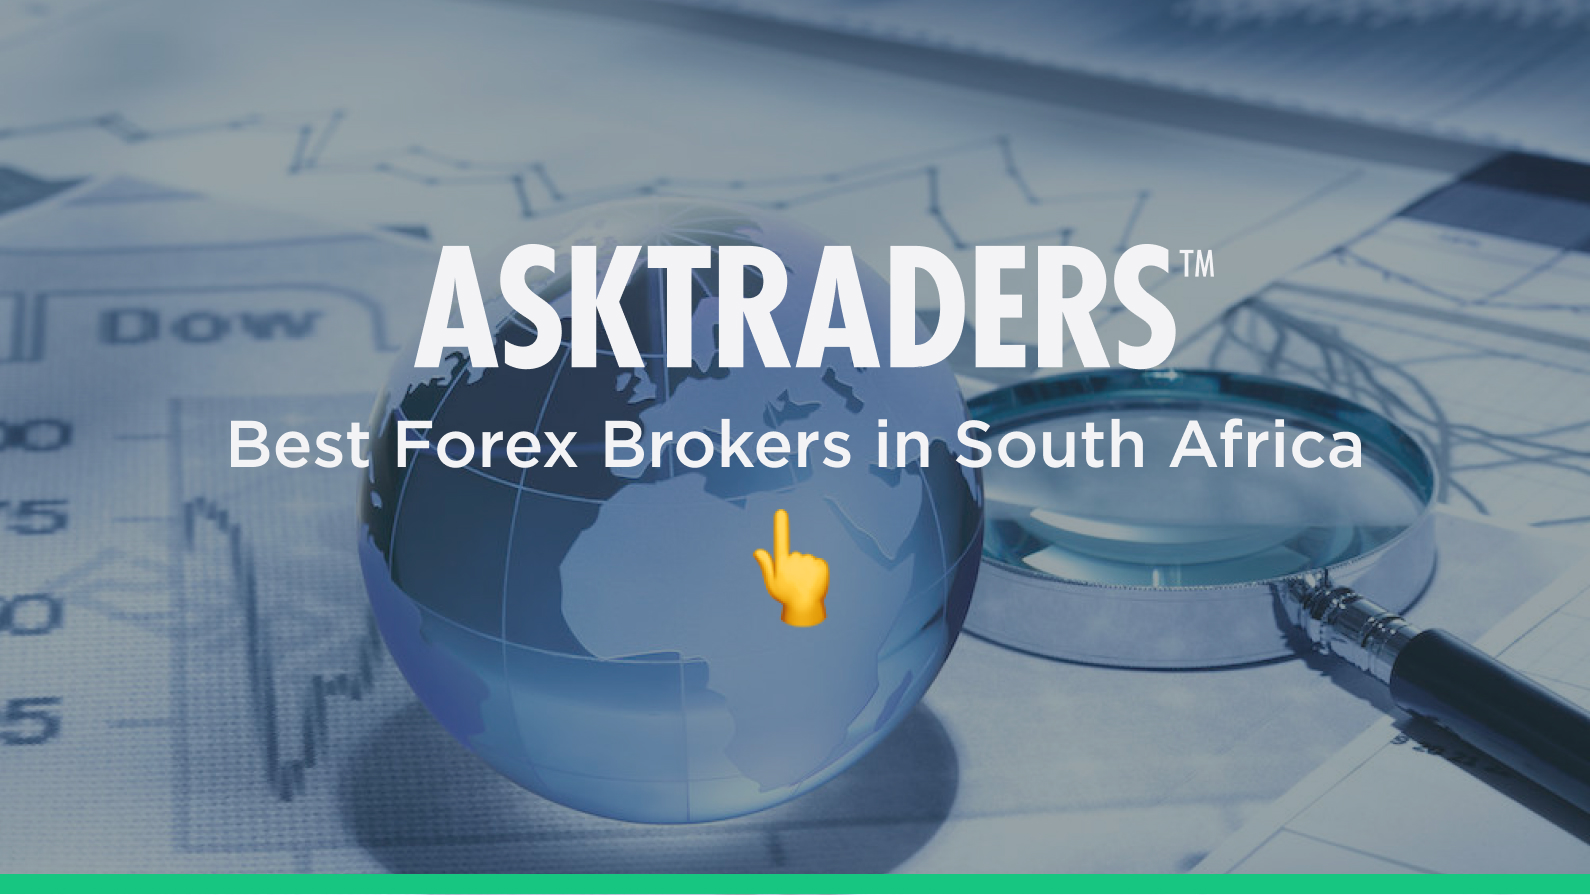 Top 5 Recommended Forex Brokers In South Africa 2021